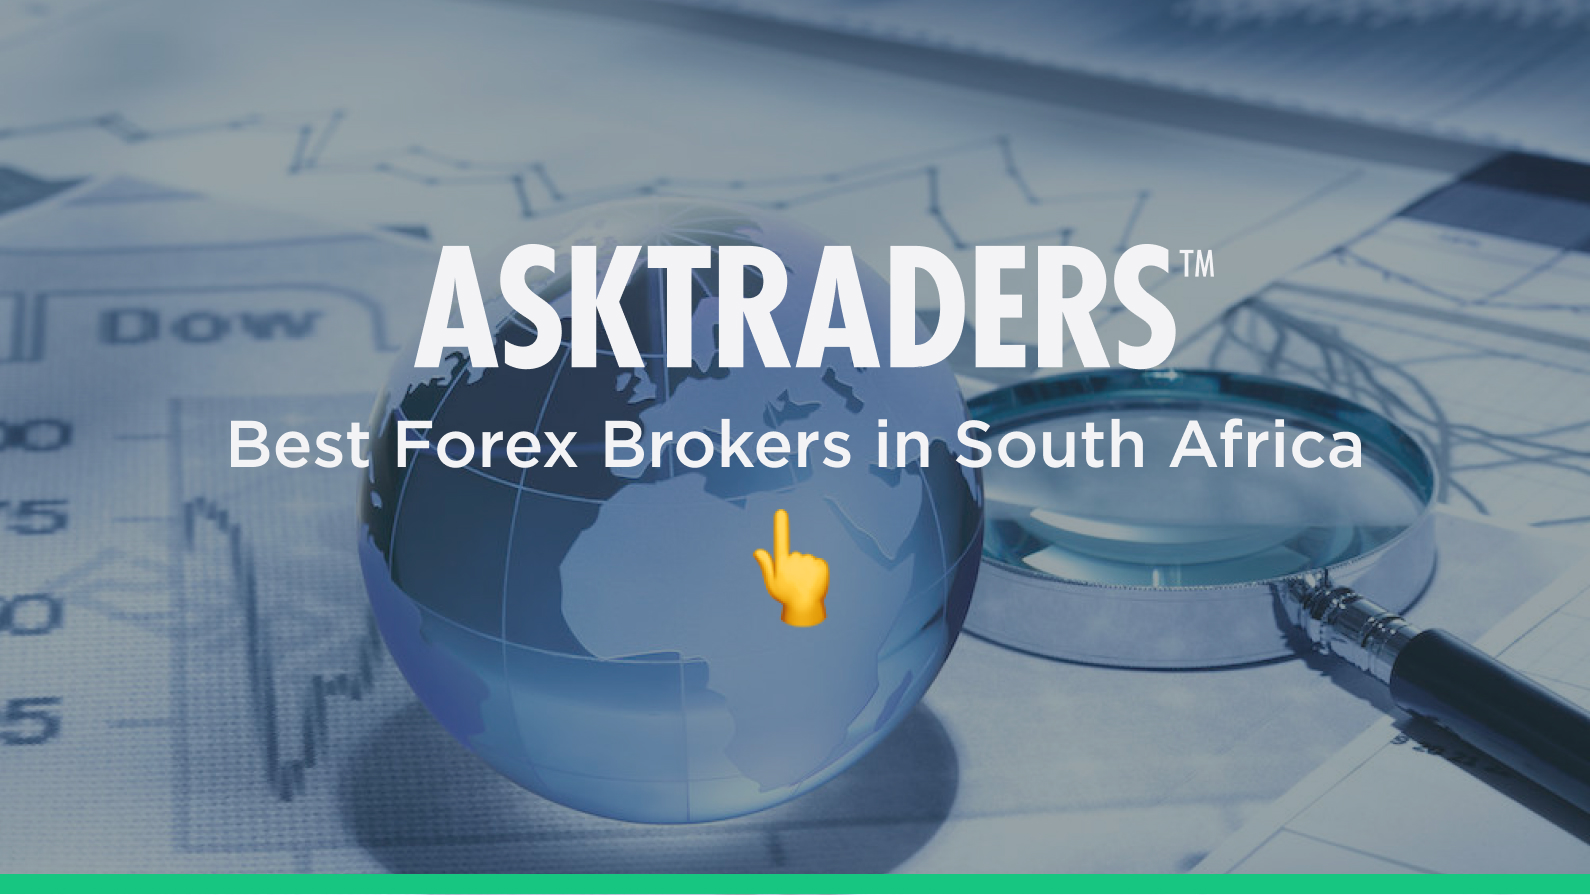 Top 5 Recommended Forex Brokers In South Africa 2021